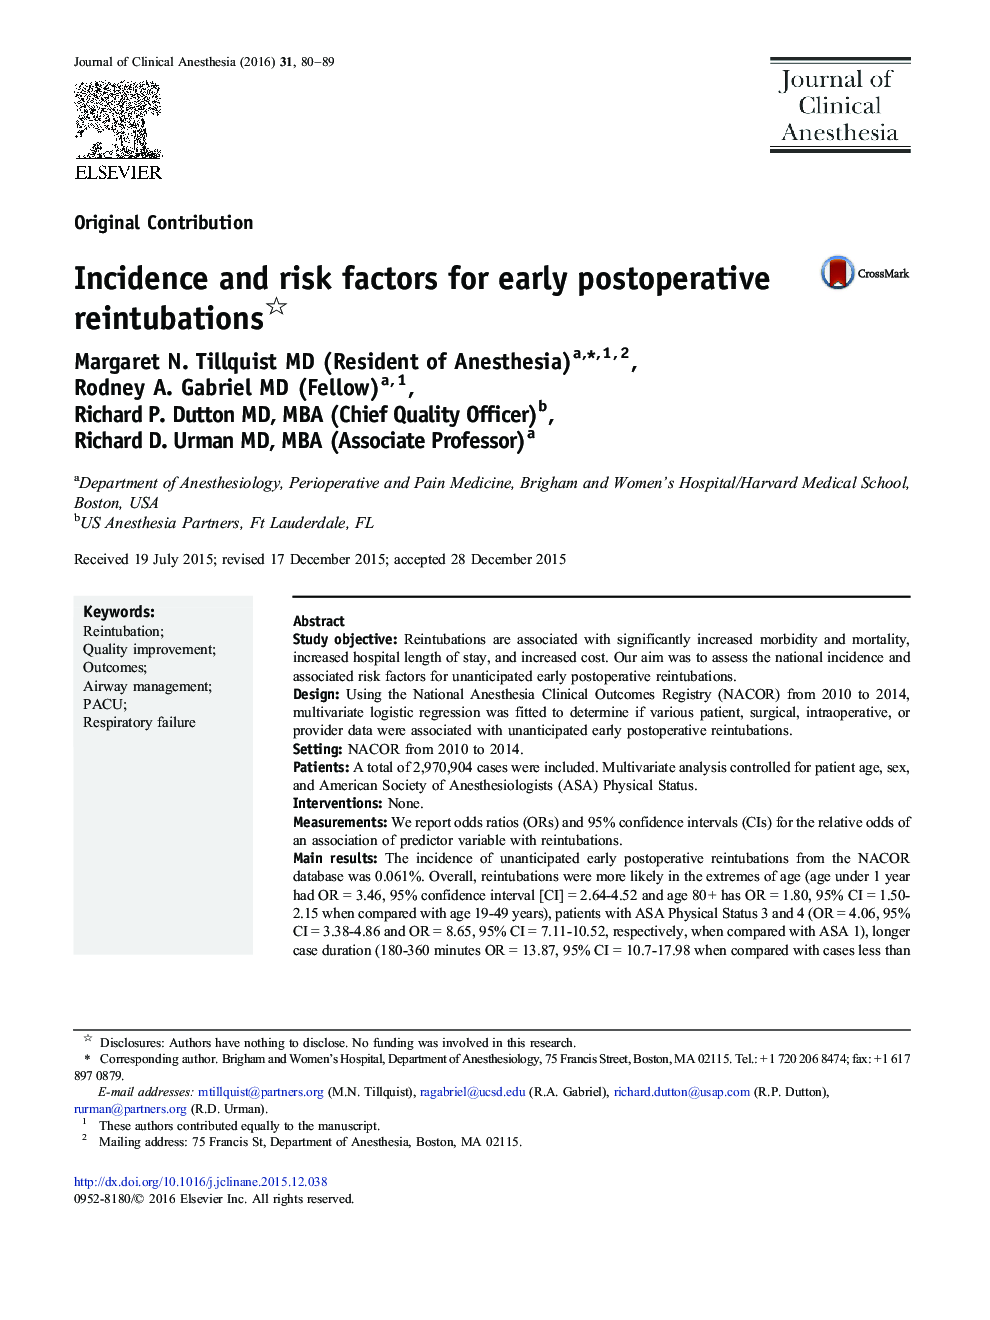 Original ContributionIncidence and risk factors for early postoperative reintubations